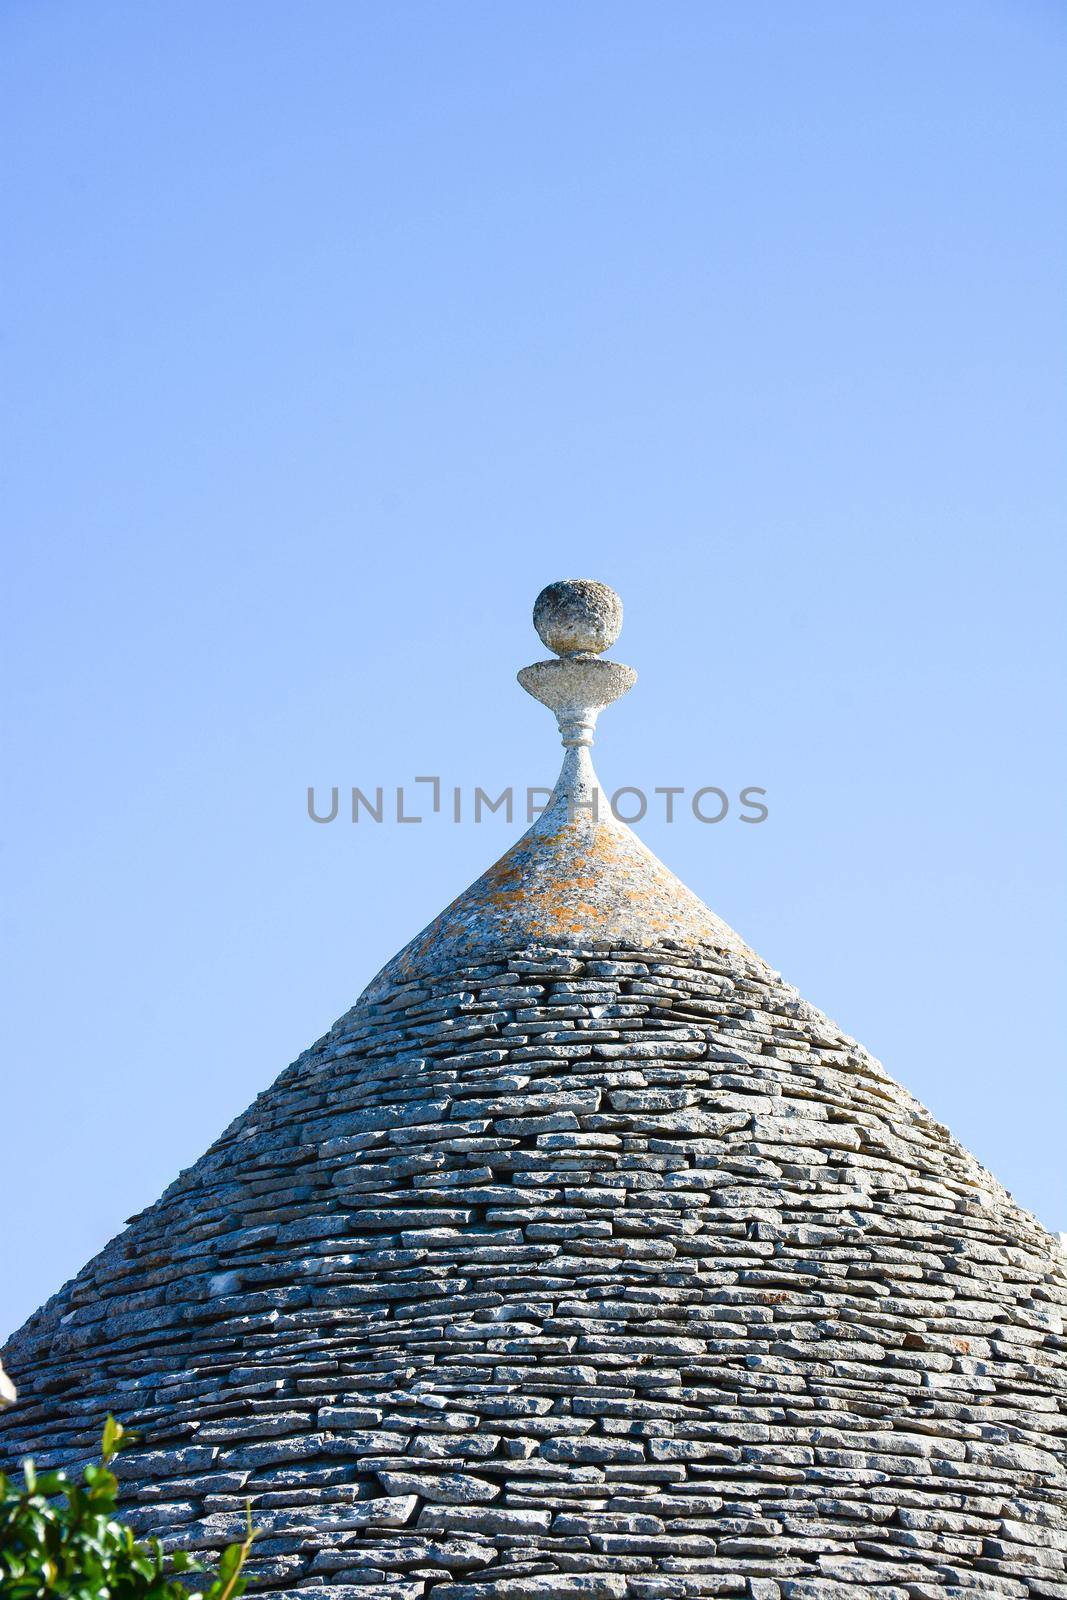 magic superstitious and esoteric symbols placed to finish the roofs of trulli in antiquity to chase away evil spirits